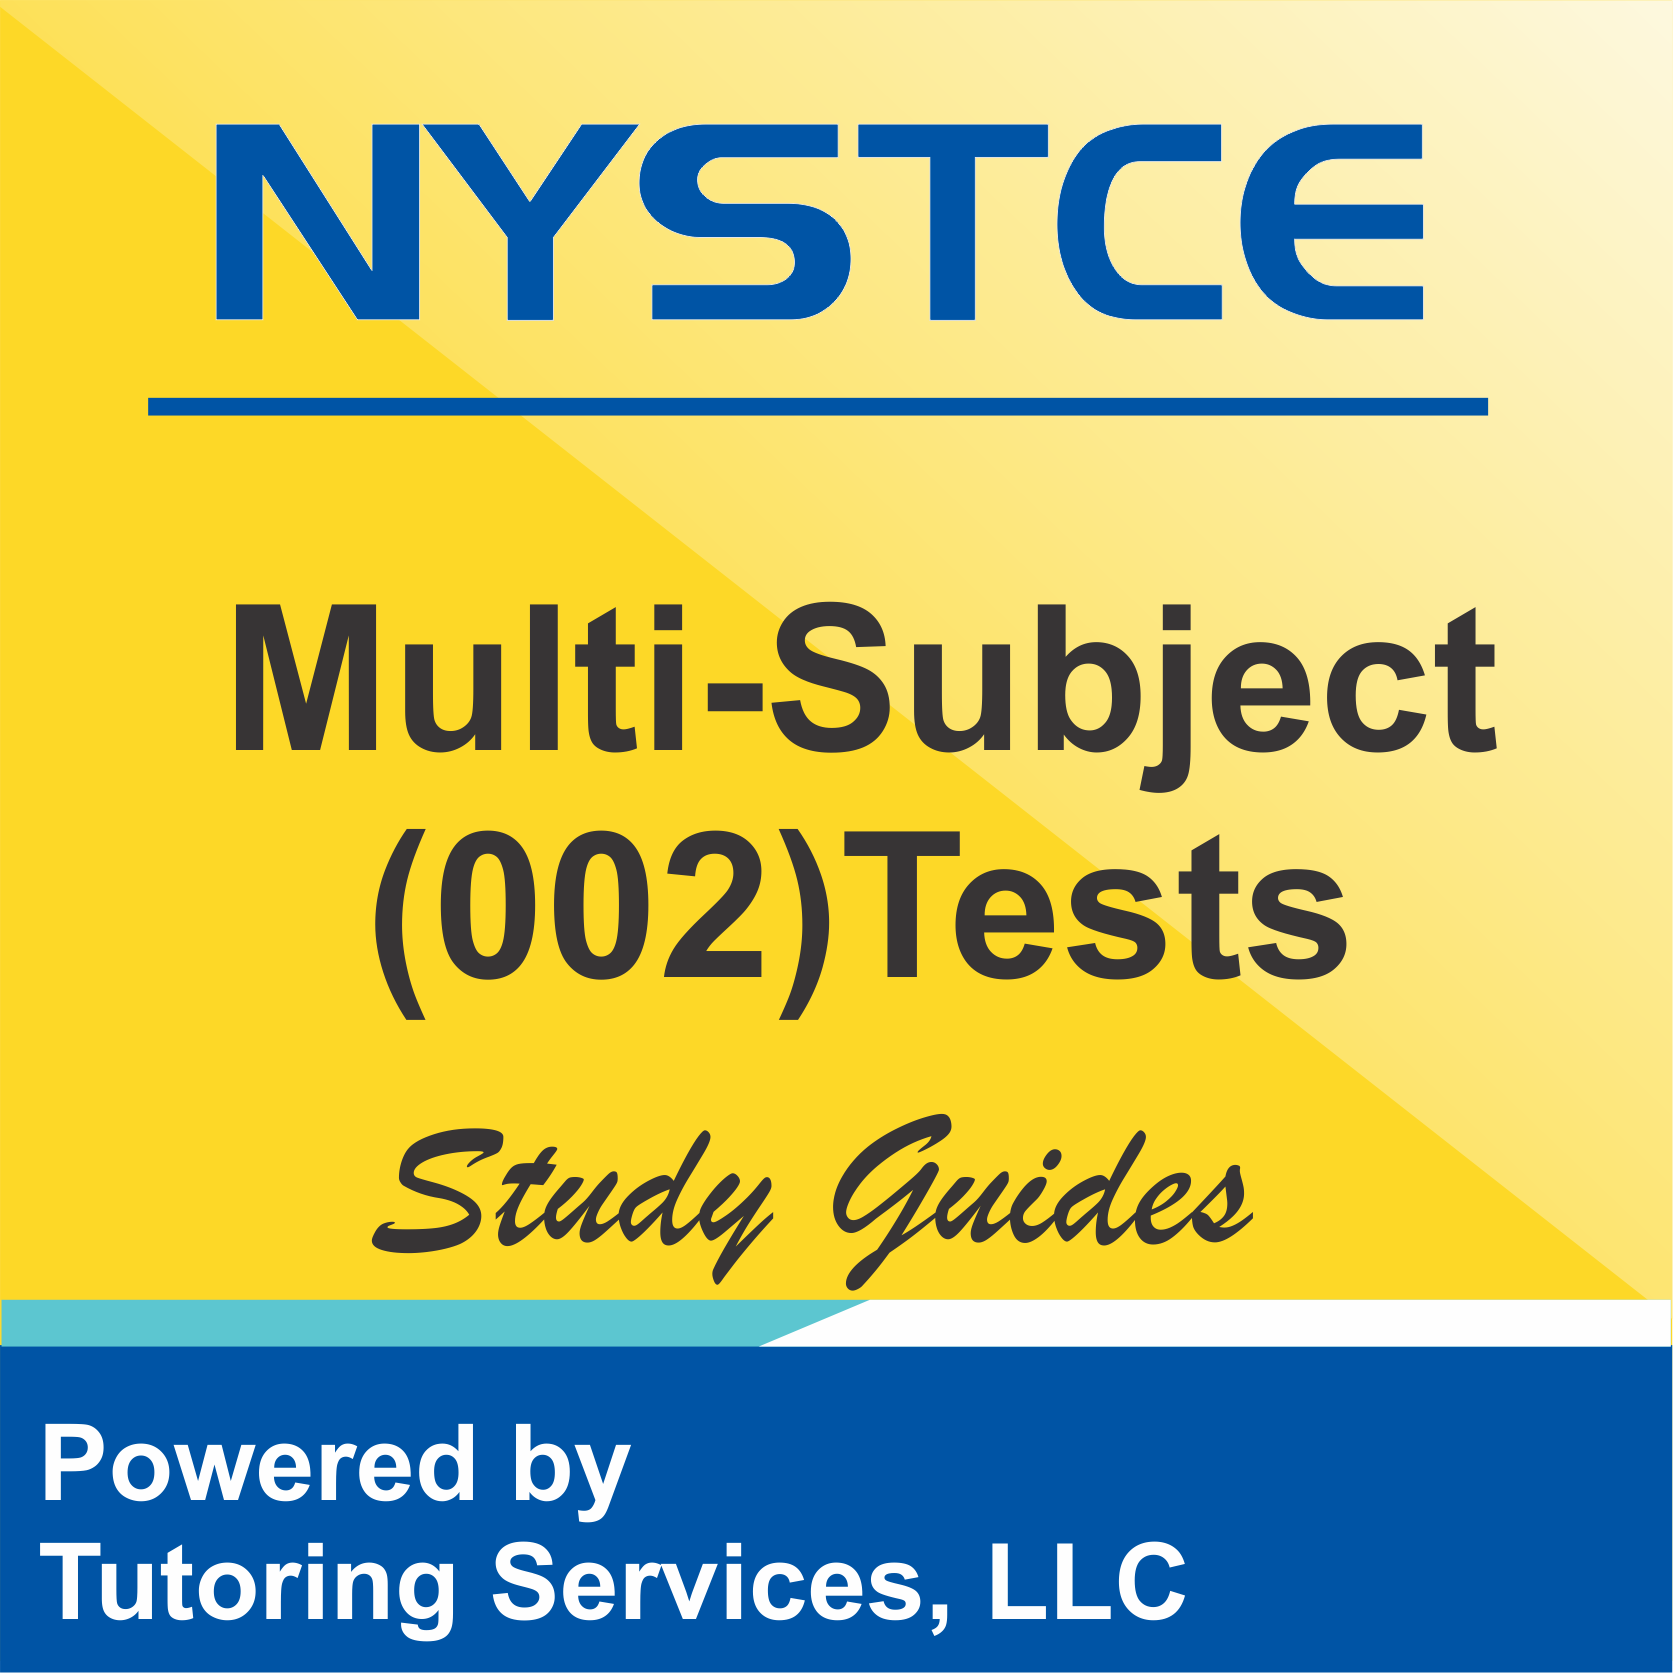 NYSTCE Teaching Certification Assessment Details for Multi-Subject 002